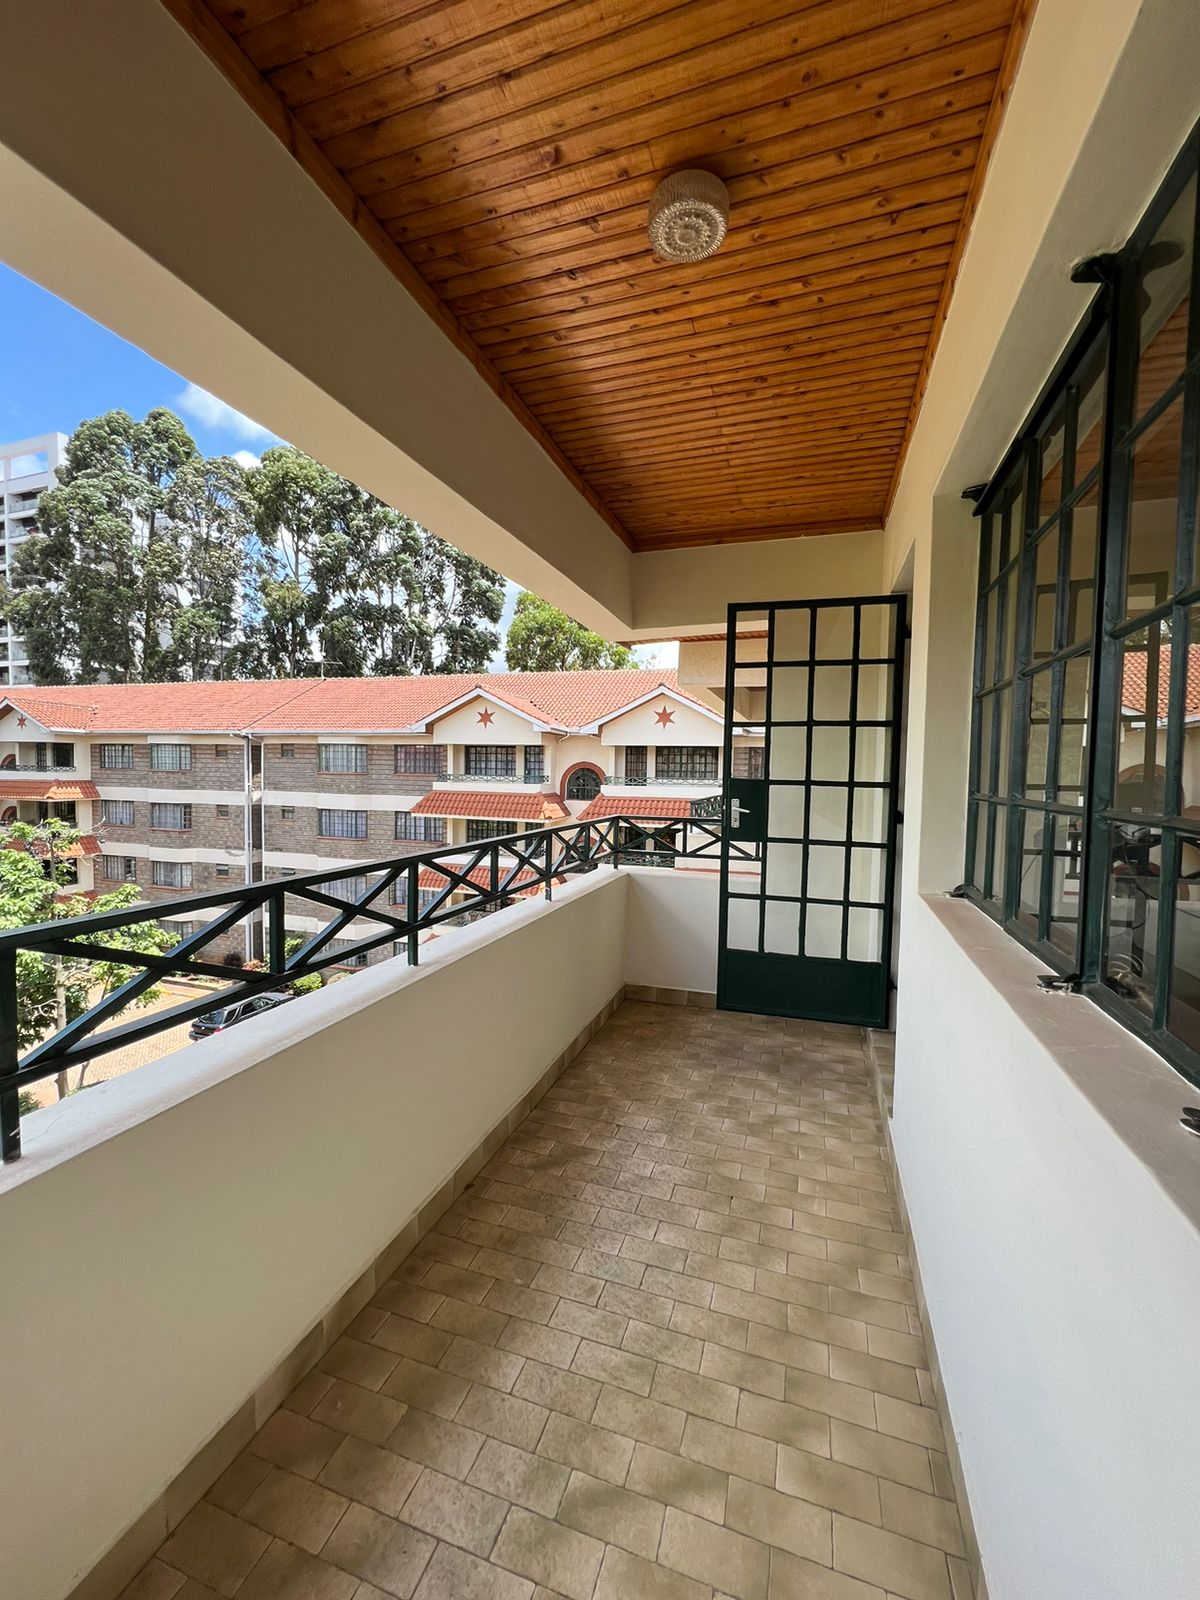 3 bedroom apartment to let and sale in Lavington. Sale at 20M. Rent per month 85,000. Has a shared swimming pool. Musilli Homes